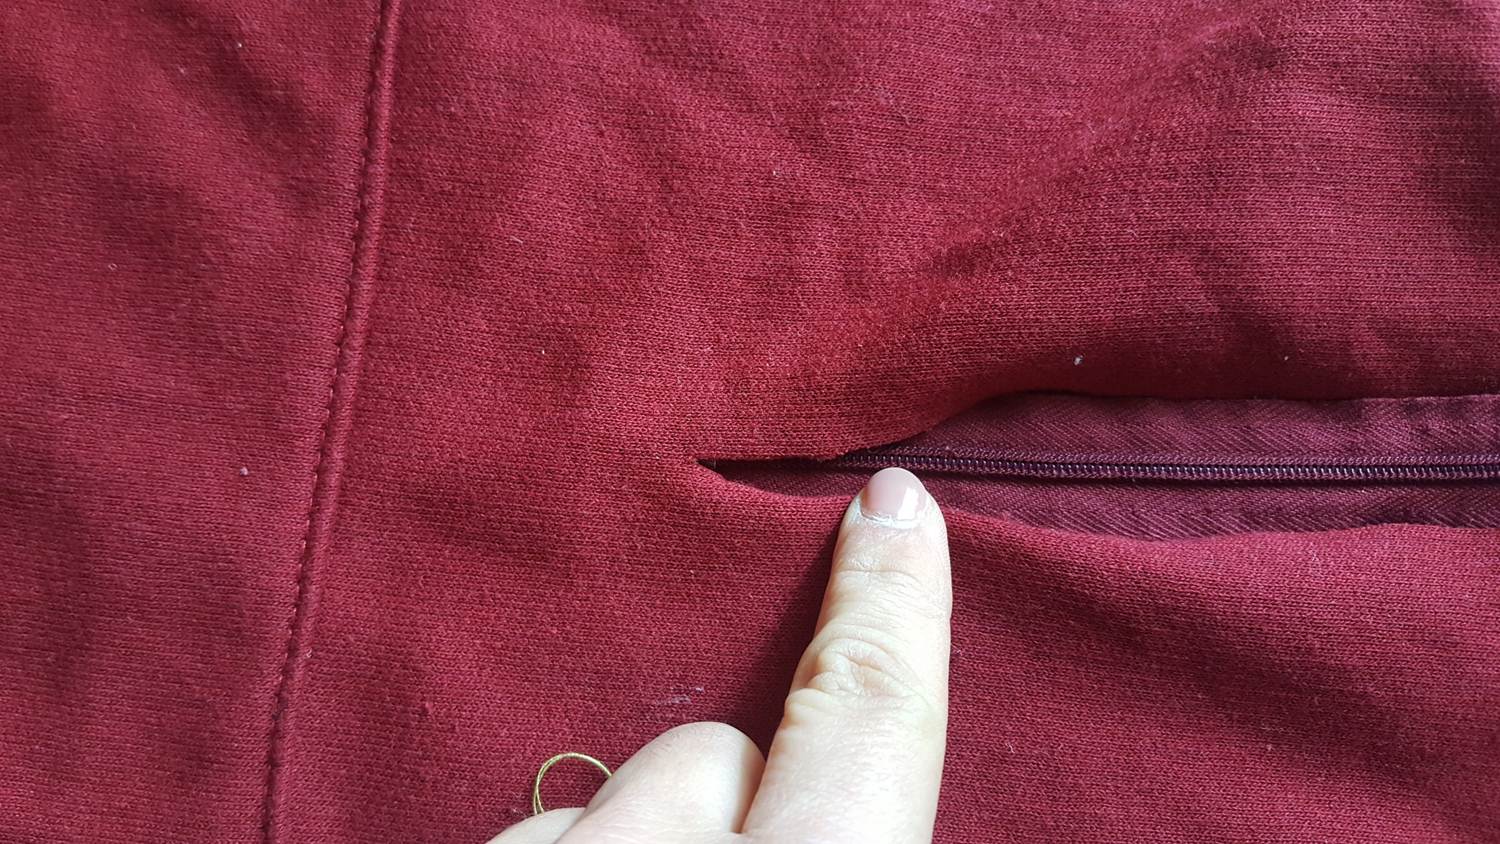 How to add a zipper to a hooded sweatshirt |Keeping it Real